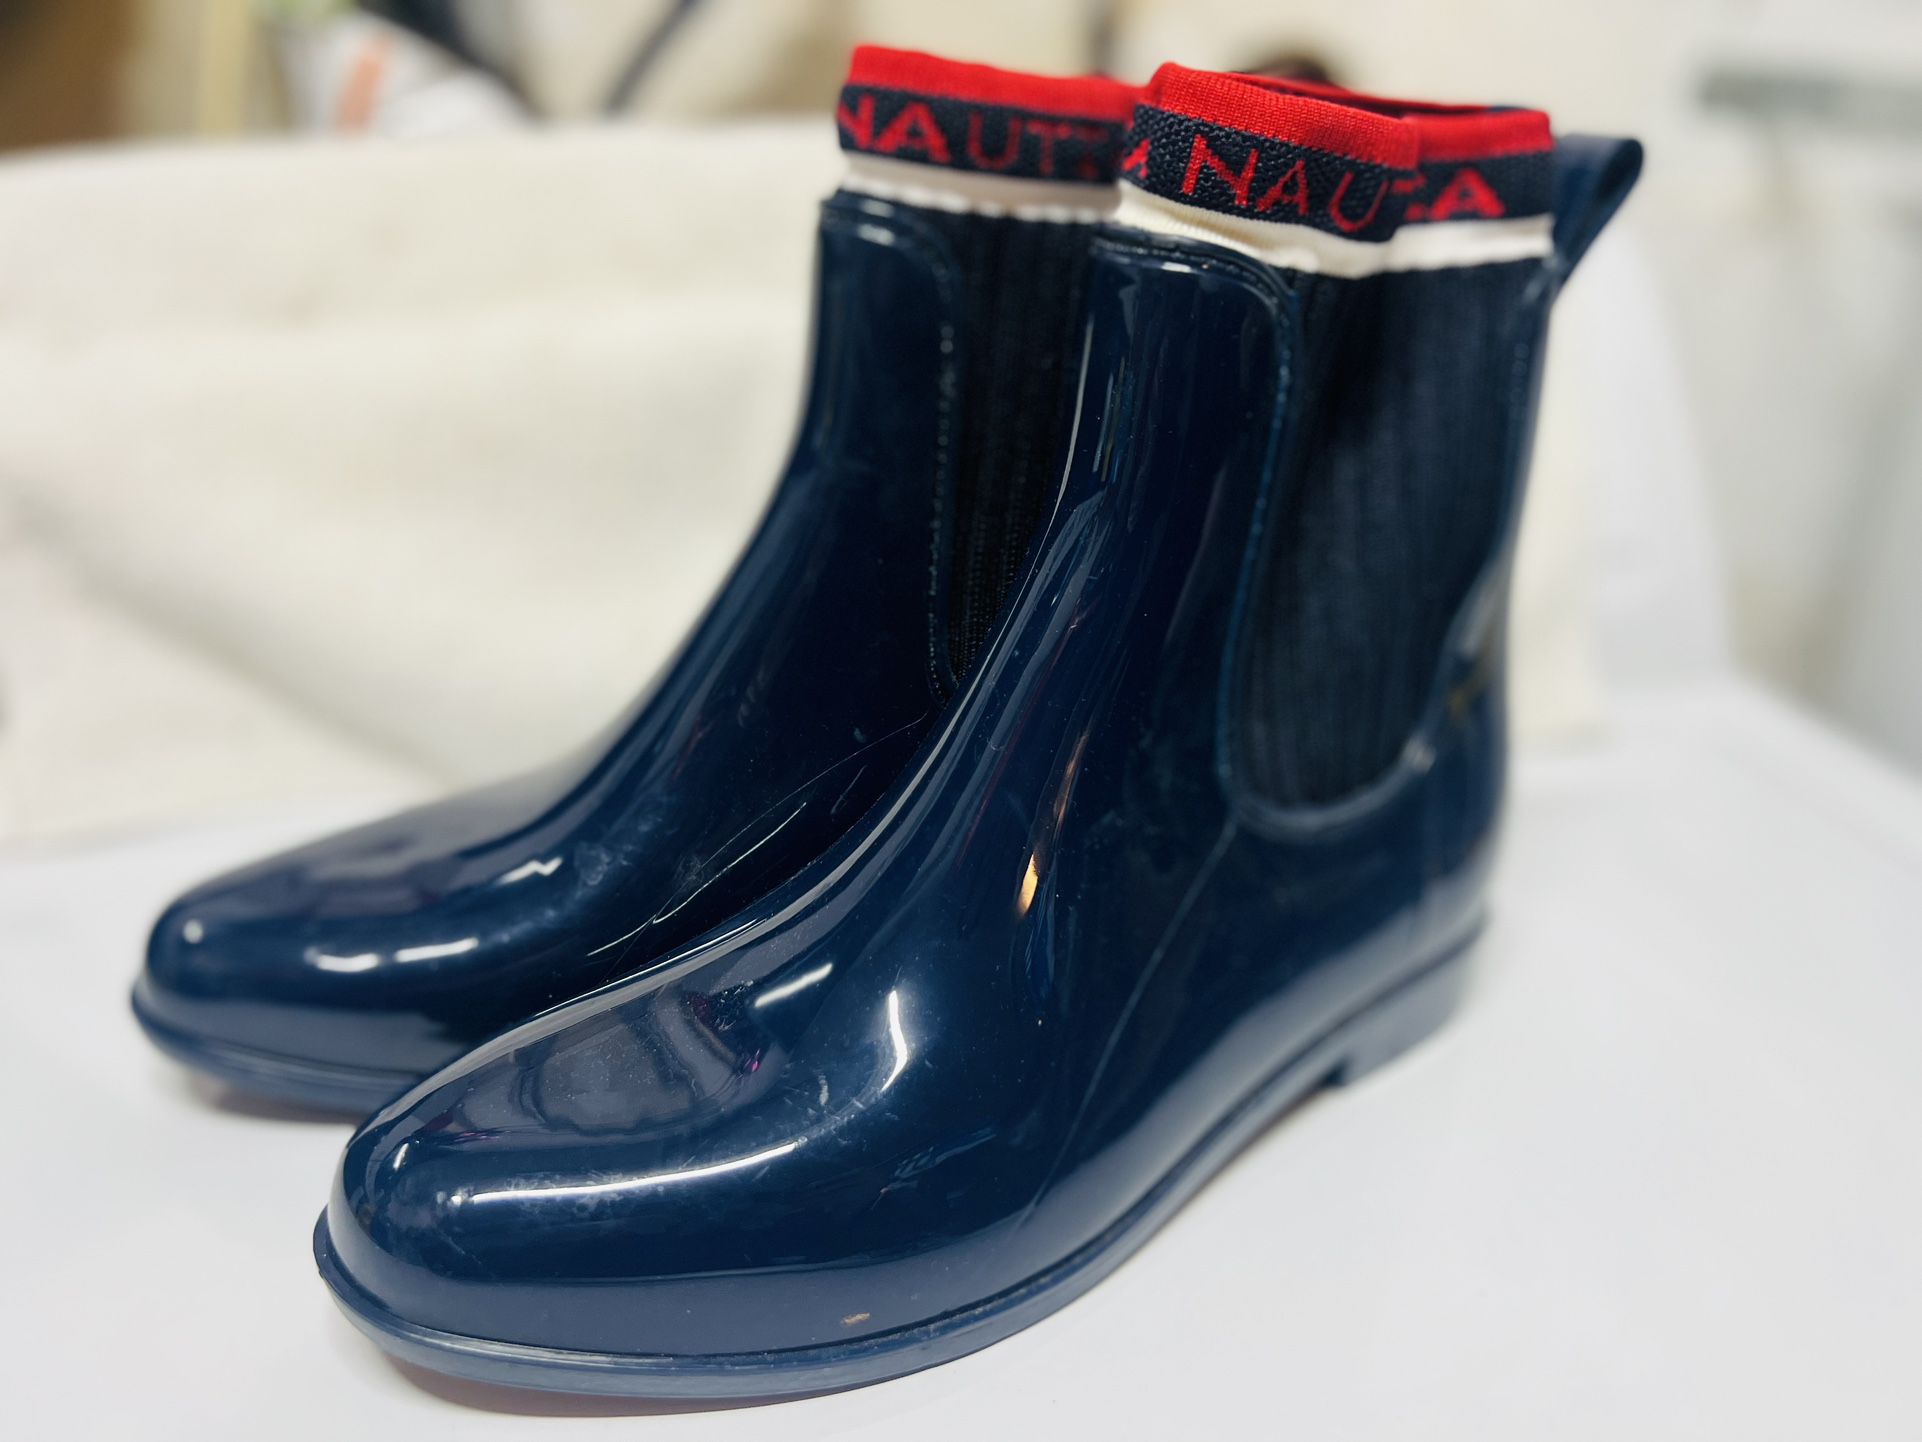 Women’s Rain Boots Size 10 By Náutica for Sale in Fontana, CA - OfferUp